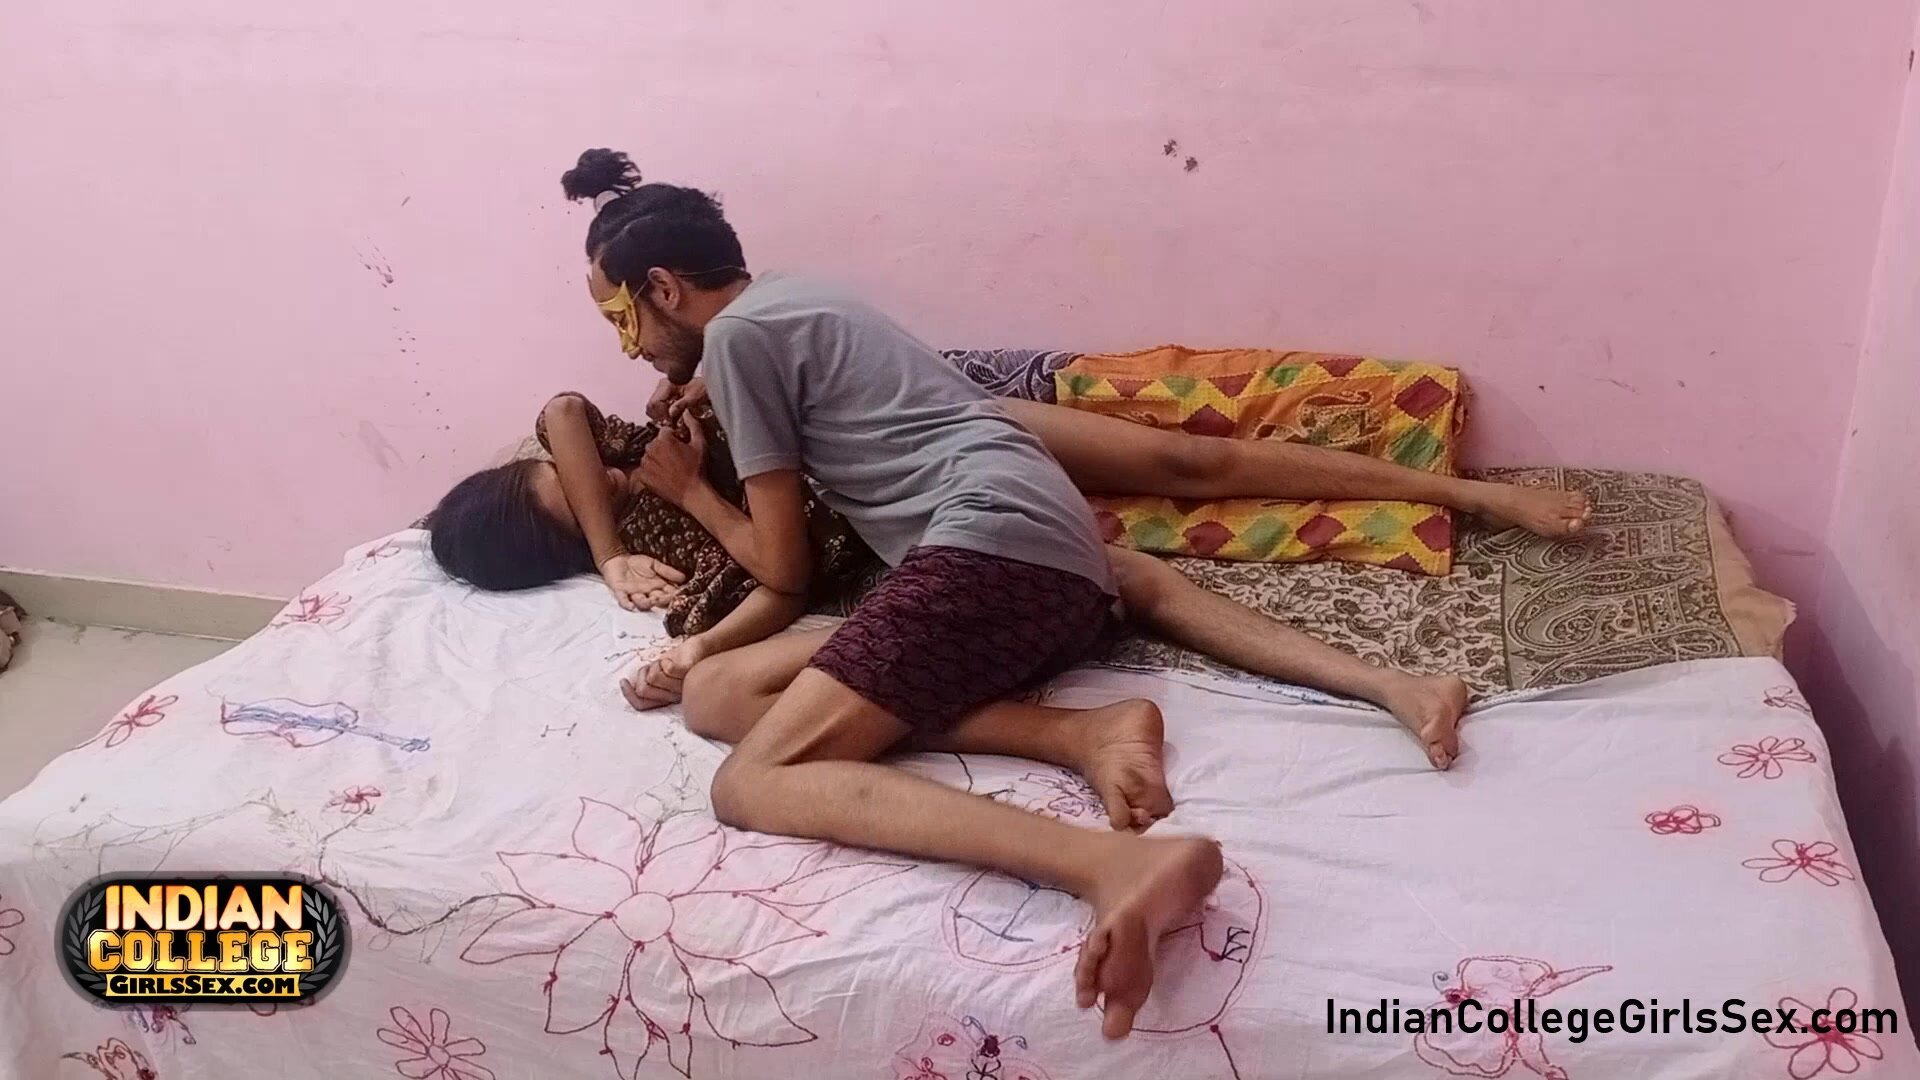 Amateur Indian skinny teen get an anal creampie after a hard desi pussy fucking sex at Fapnado photo